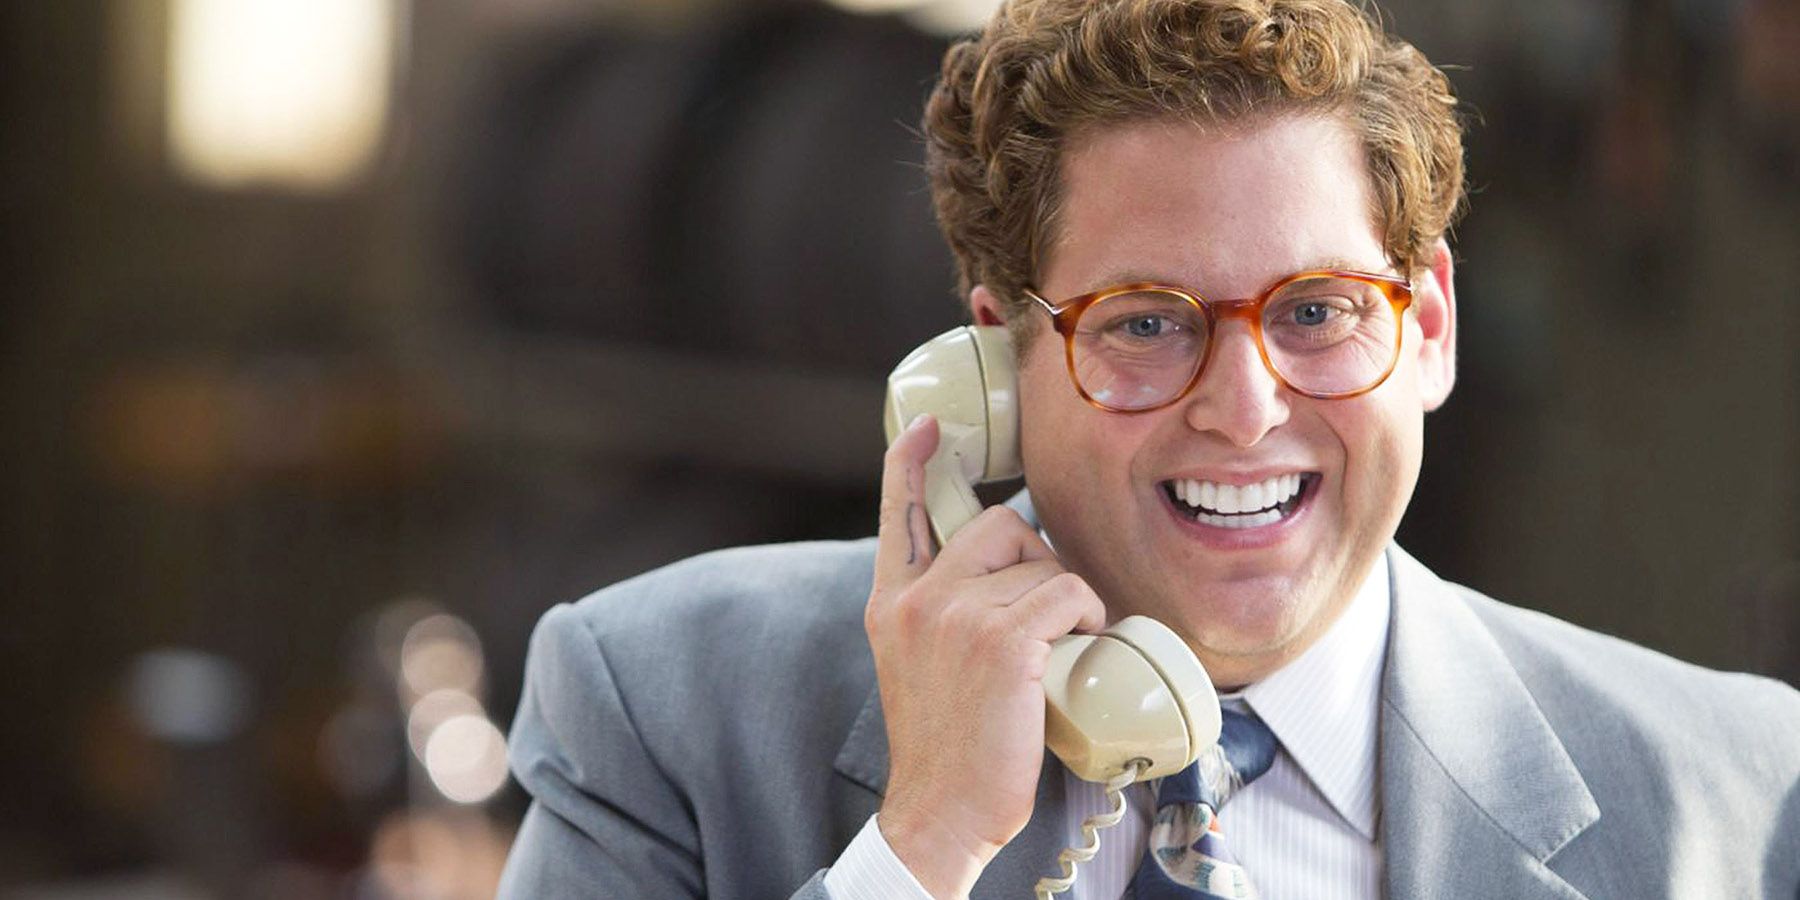 Donnie on the phone in The Wolf of Wall Street